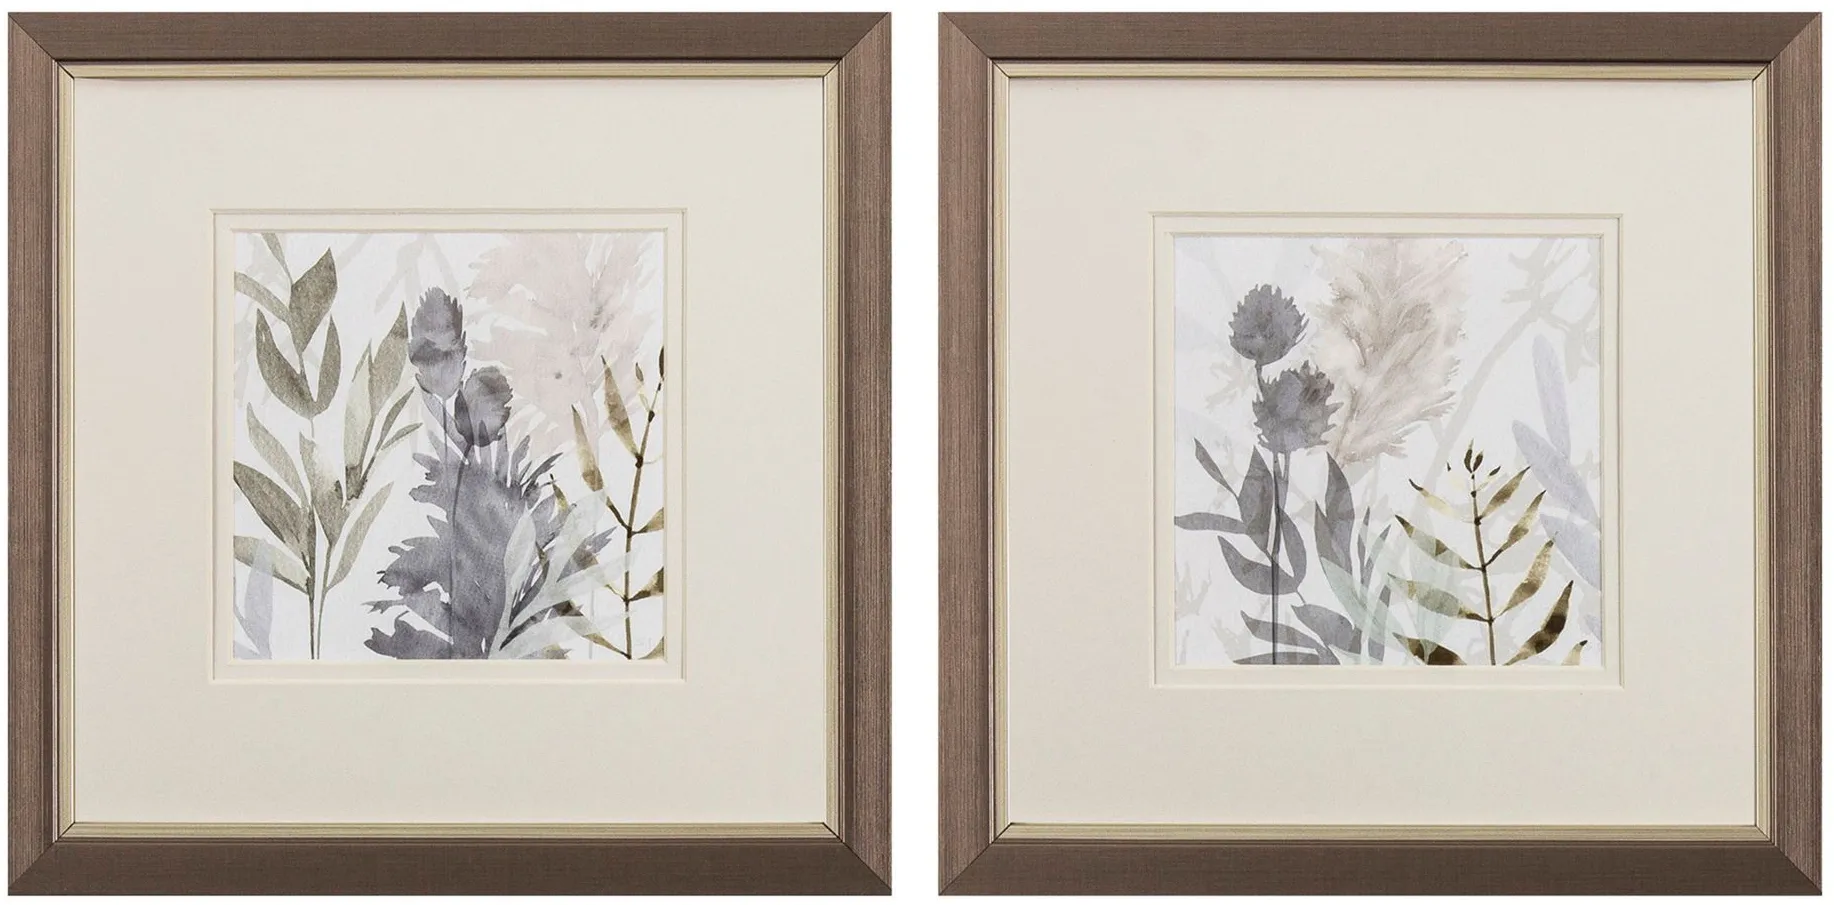 Shadow Woods Wall Art in Gray, Brown, Cream, Neutral by Propac Images